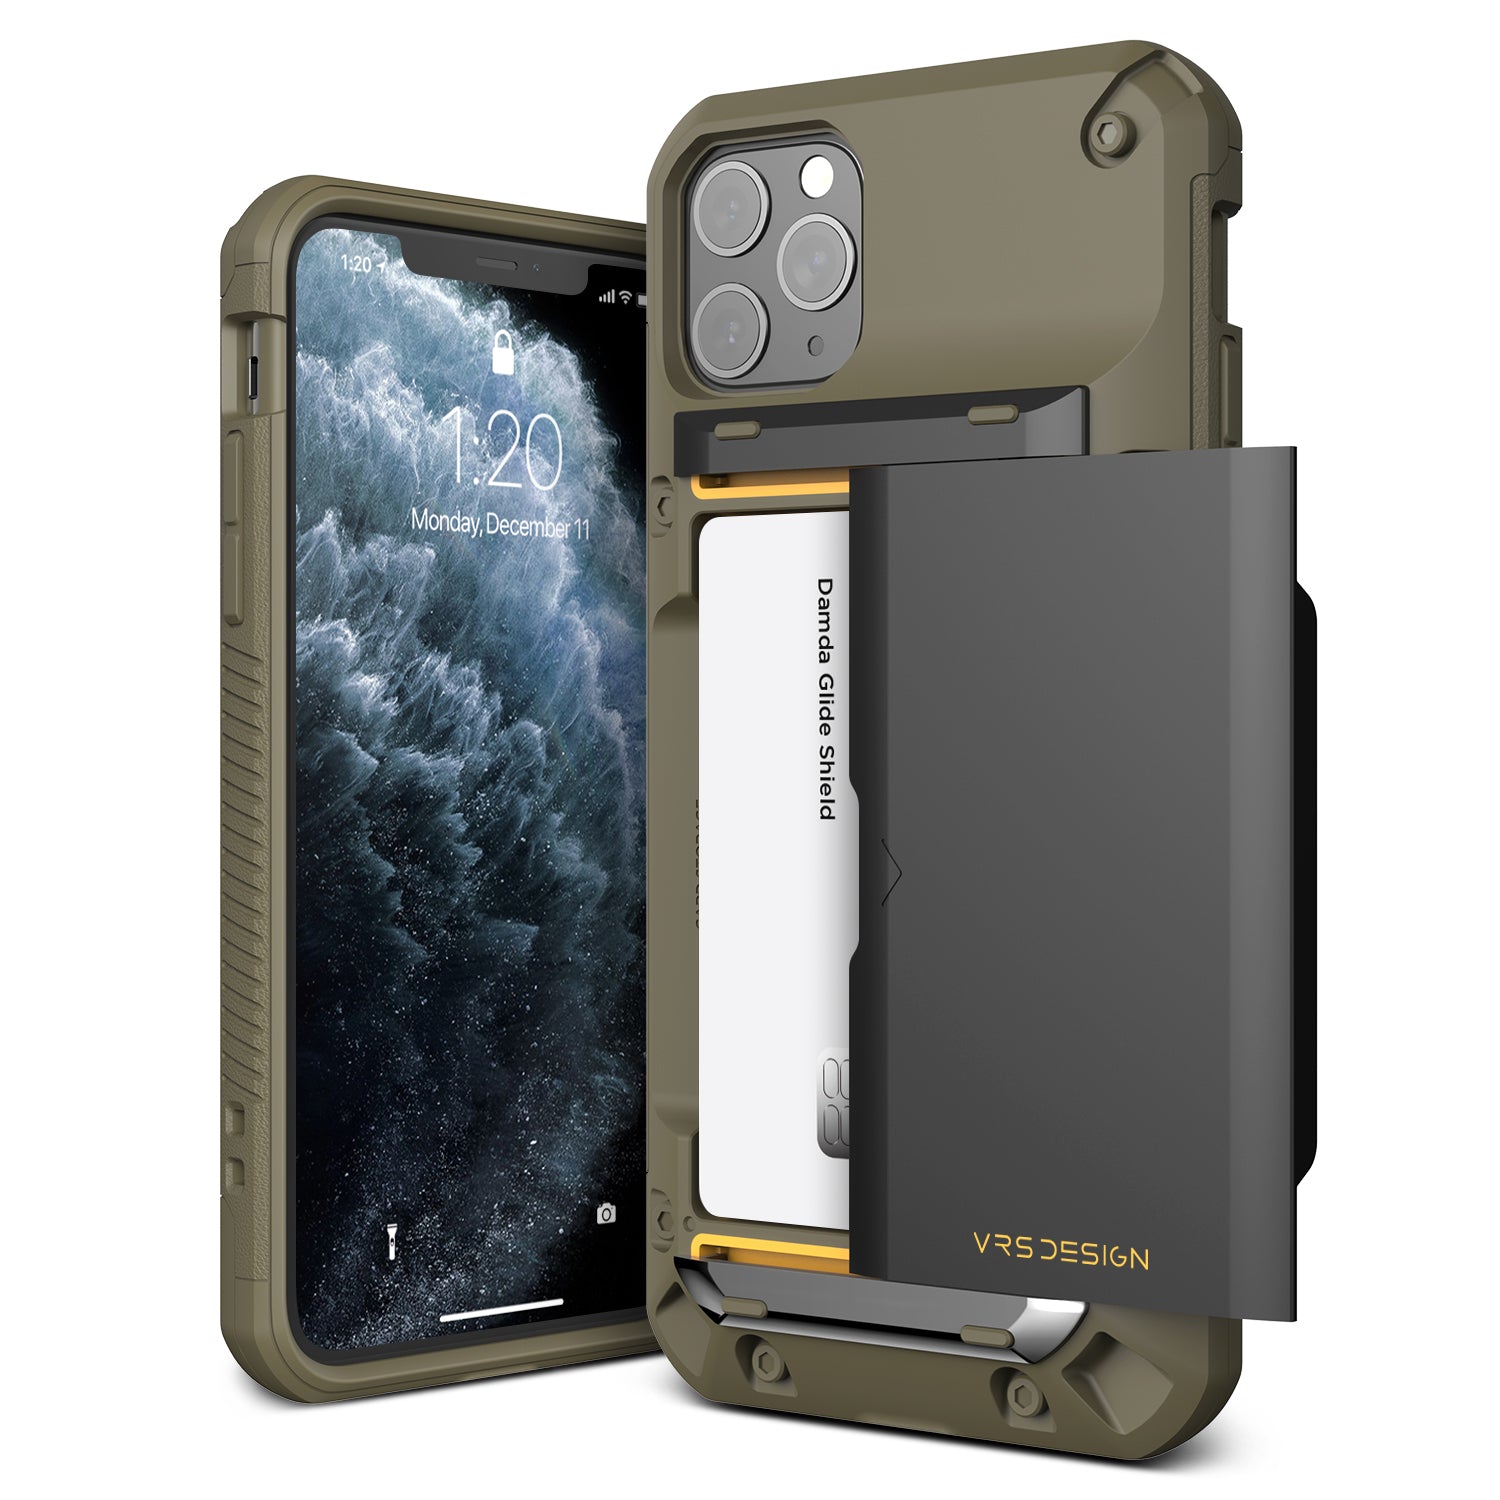 iPhone 11 Pro Case Damda Glide Pro High quality TPU material Body and Real Metal Stripe for extreme drop protection Sufficient 3-4 card tough storage that heavily limits wireless charging.